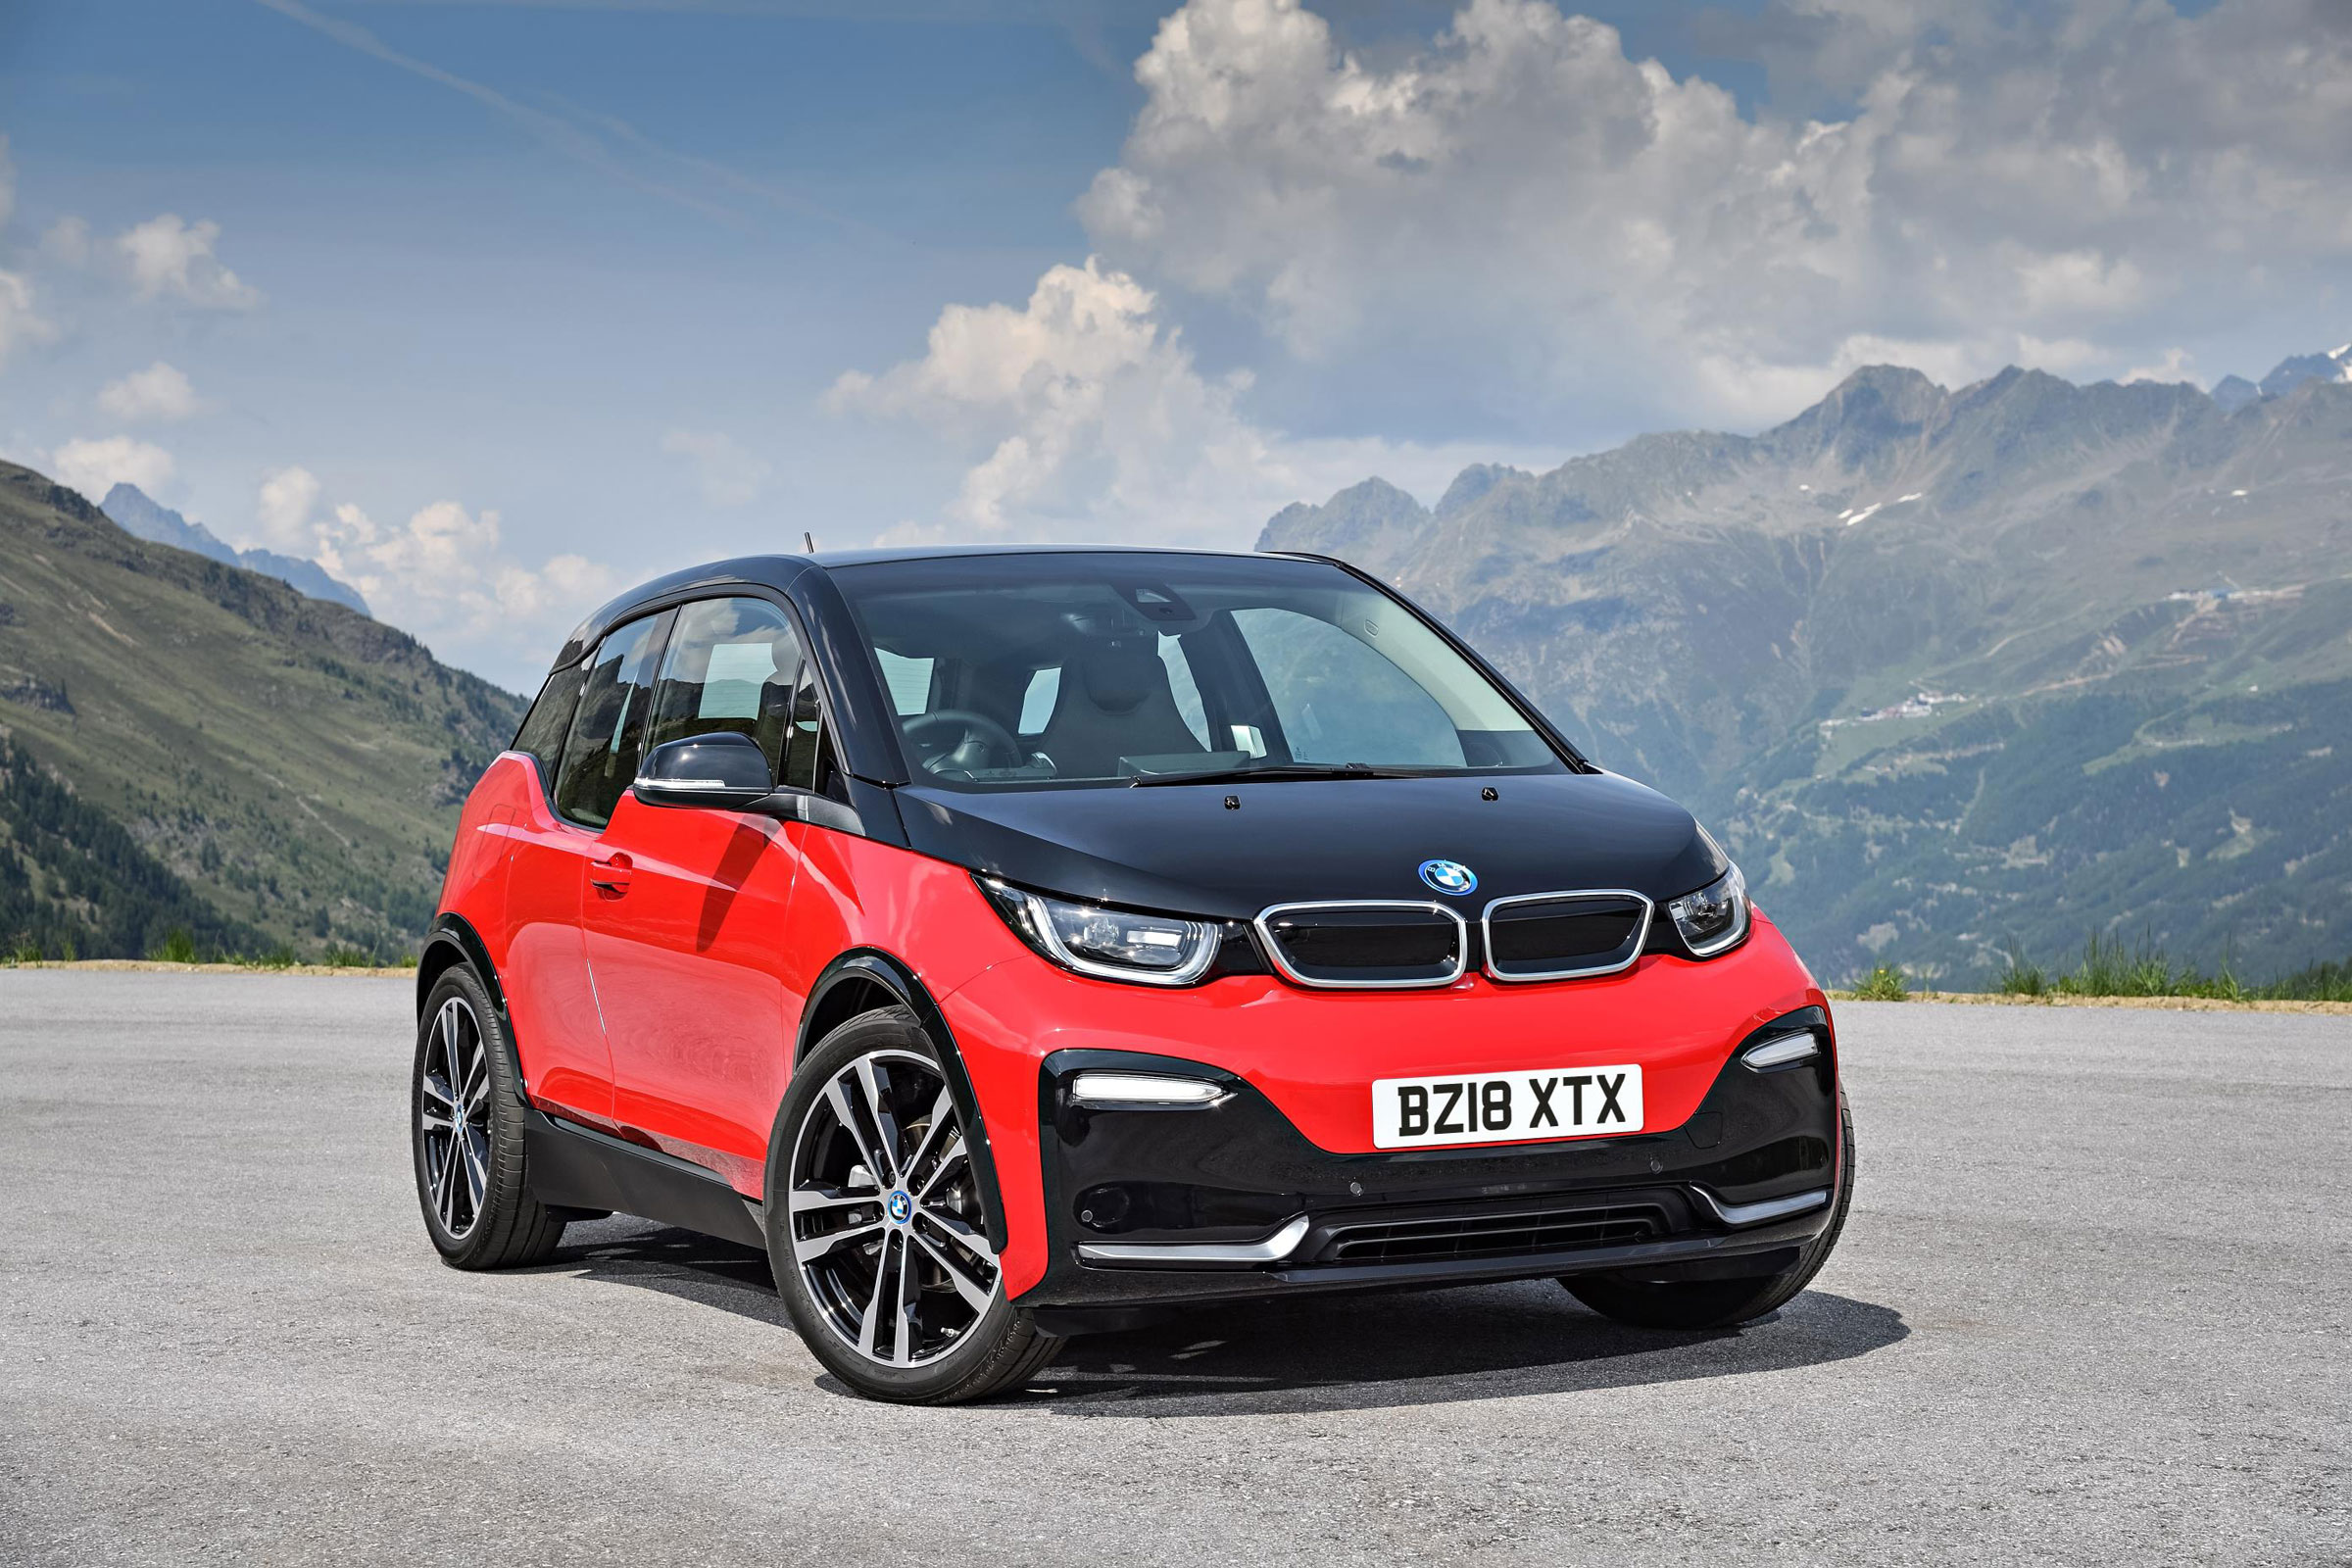 BMW i3 dimensions, boot space and electrification